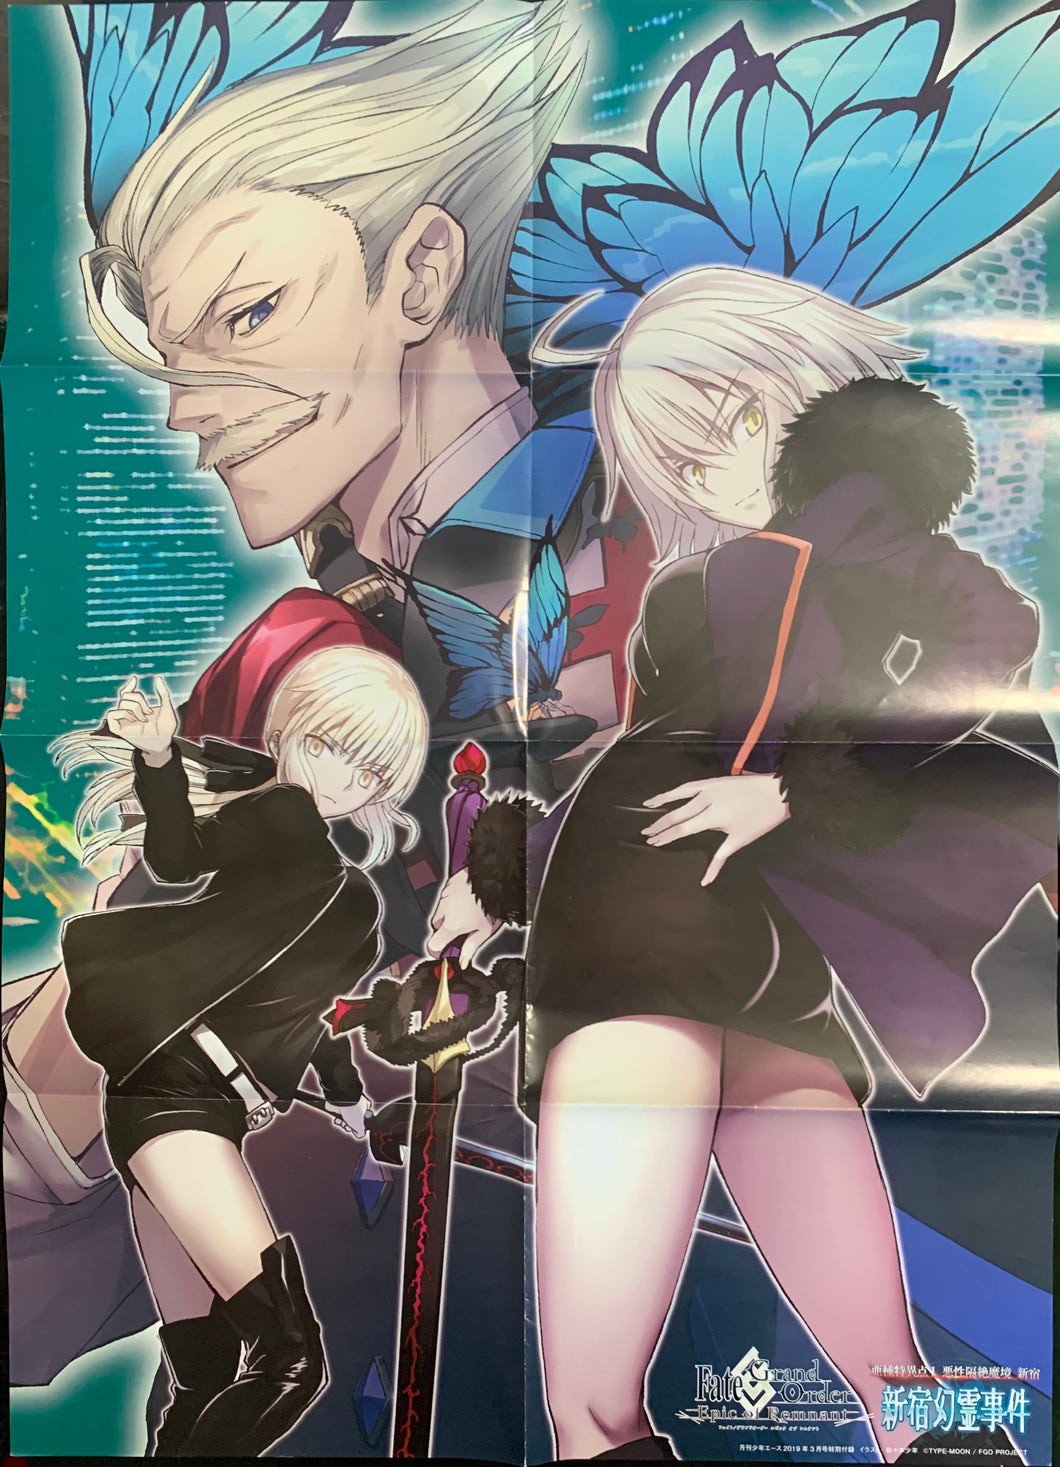 Fate/Grand Order -Epic of Remnant- - B2 Extra Large Poster - Cover Illustration - Shonen Ace March 2019